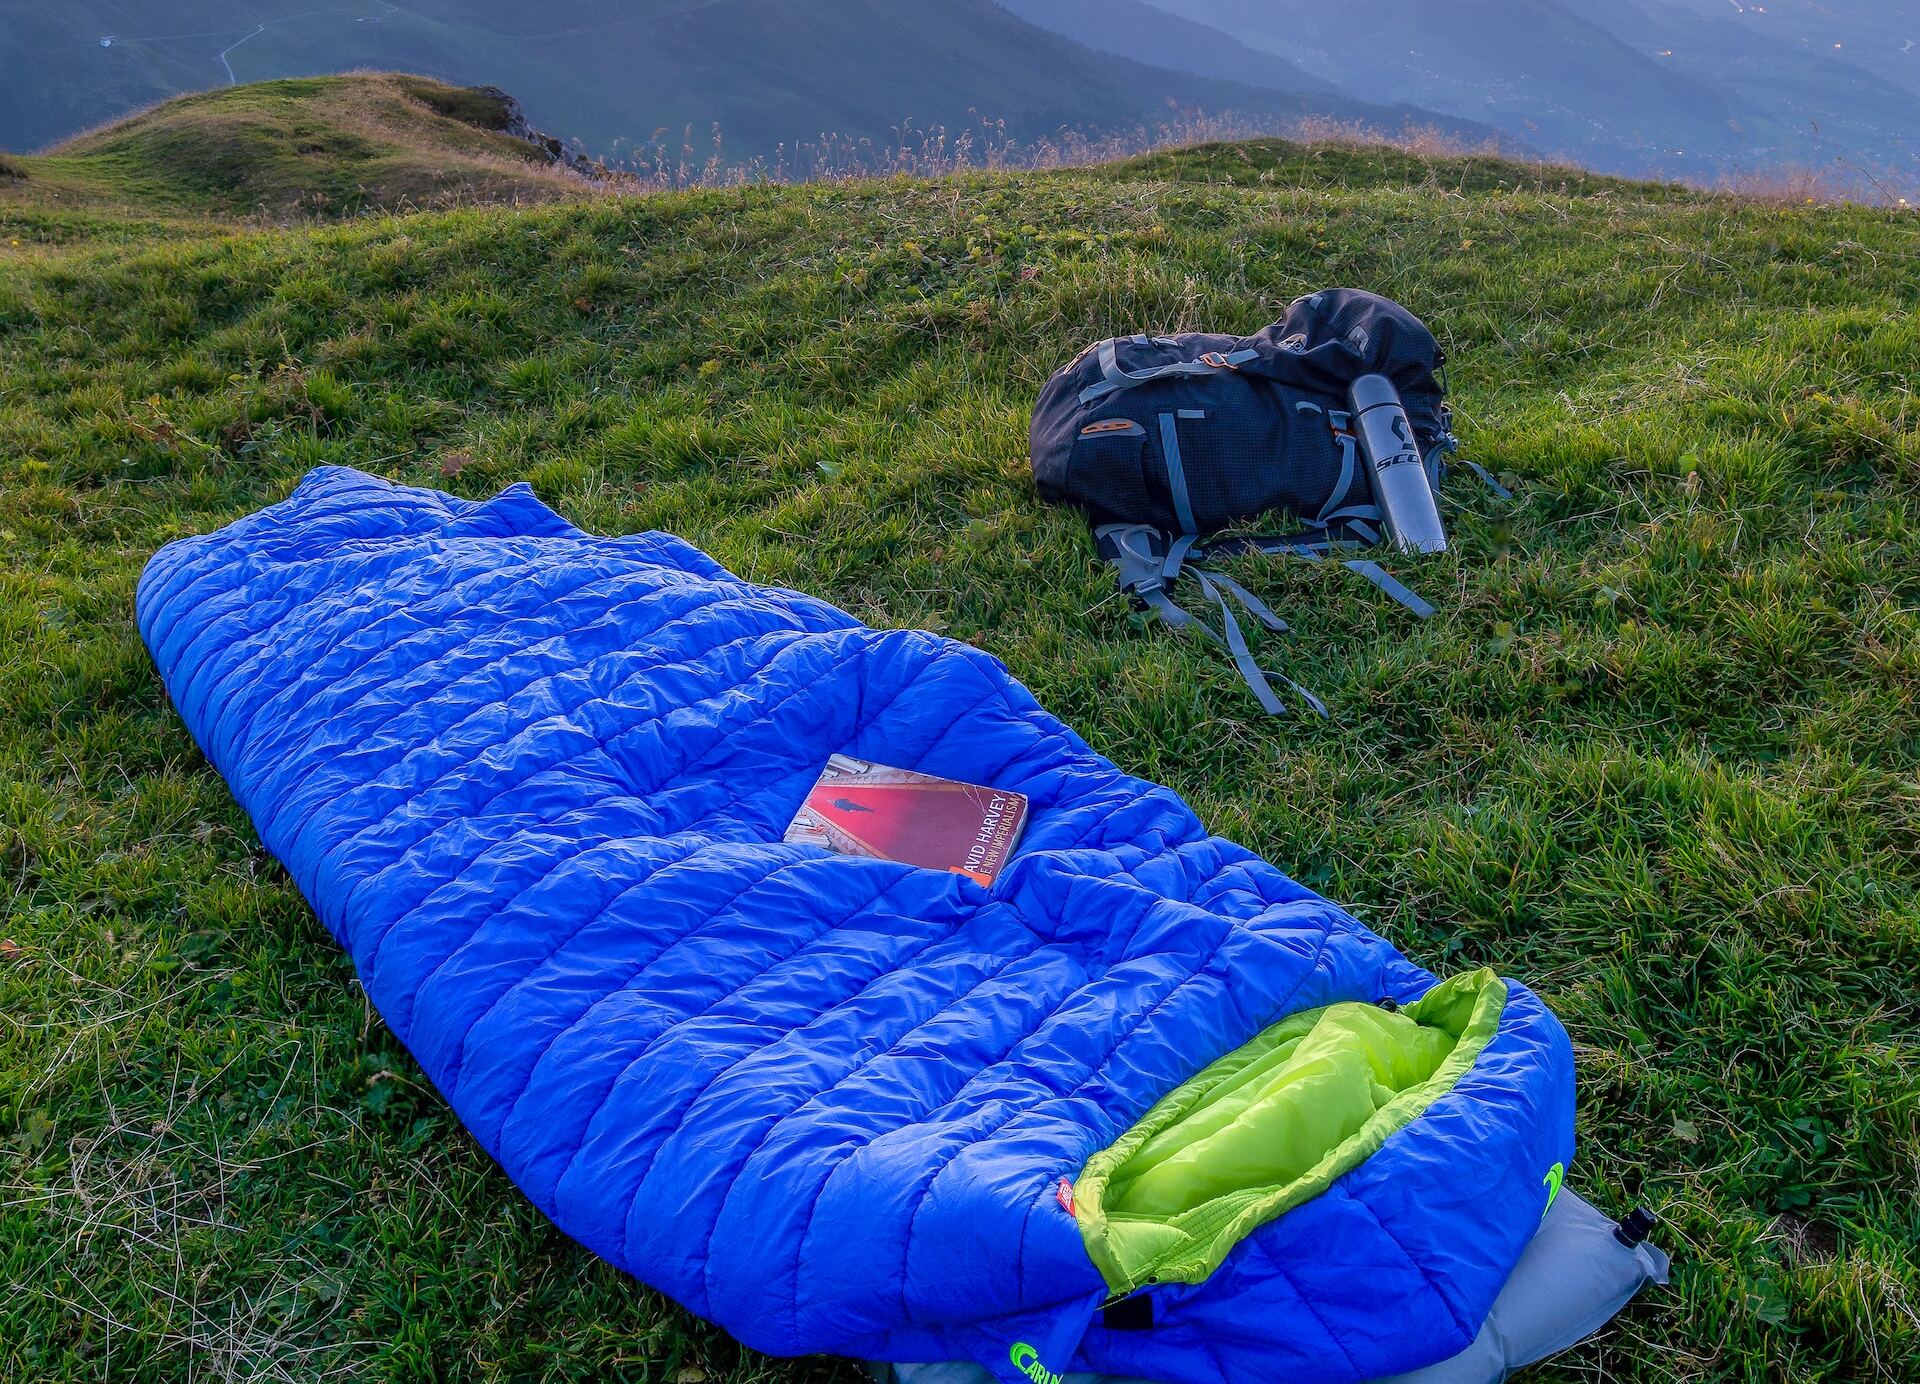 Selecting the Best Sleeping Bag for Your Outing